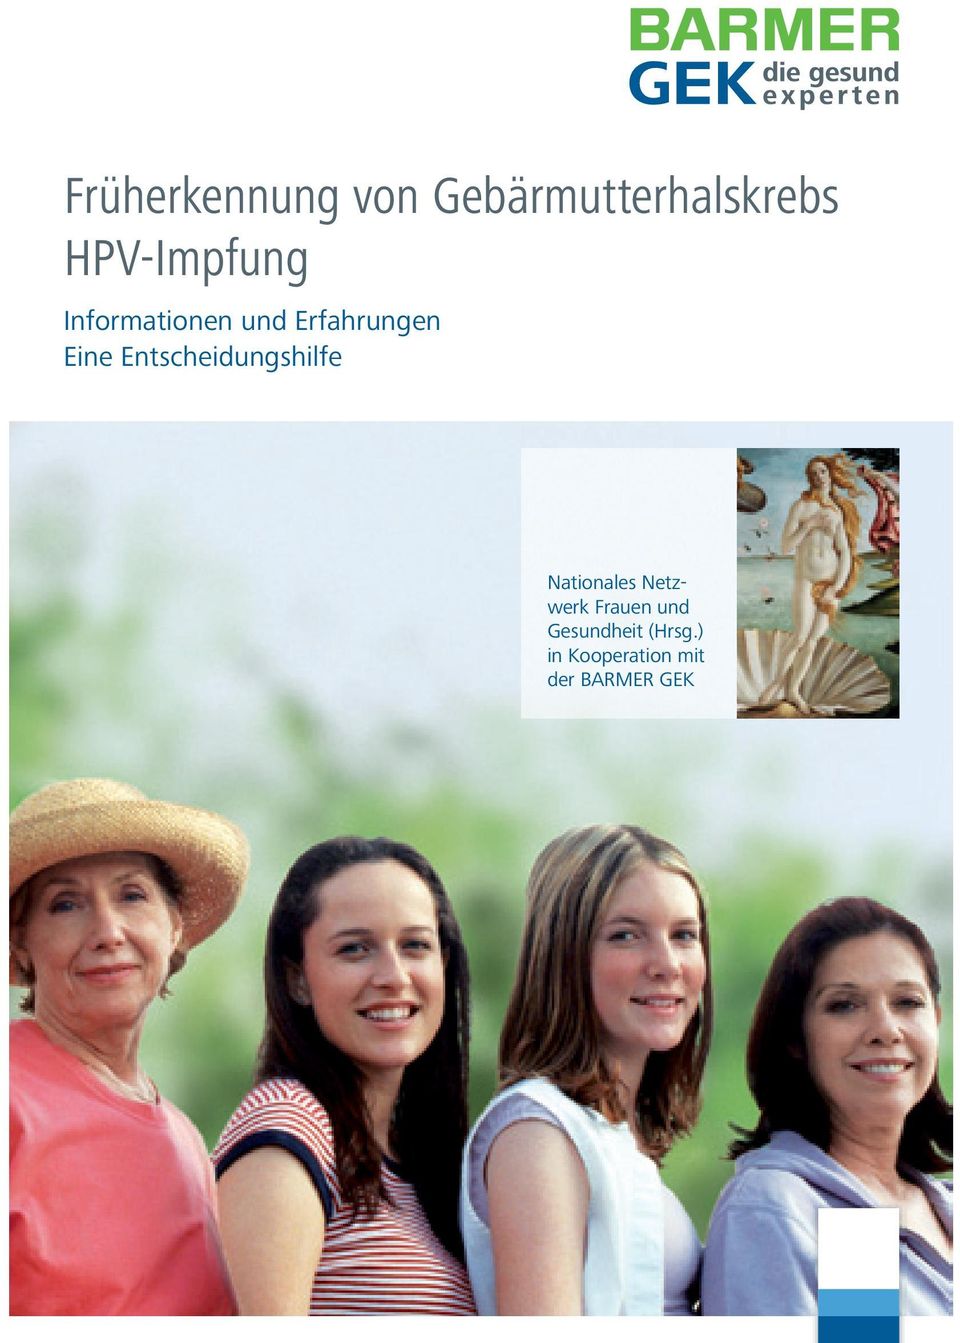 hpv impfung junge barmer